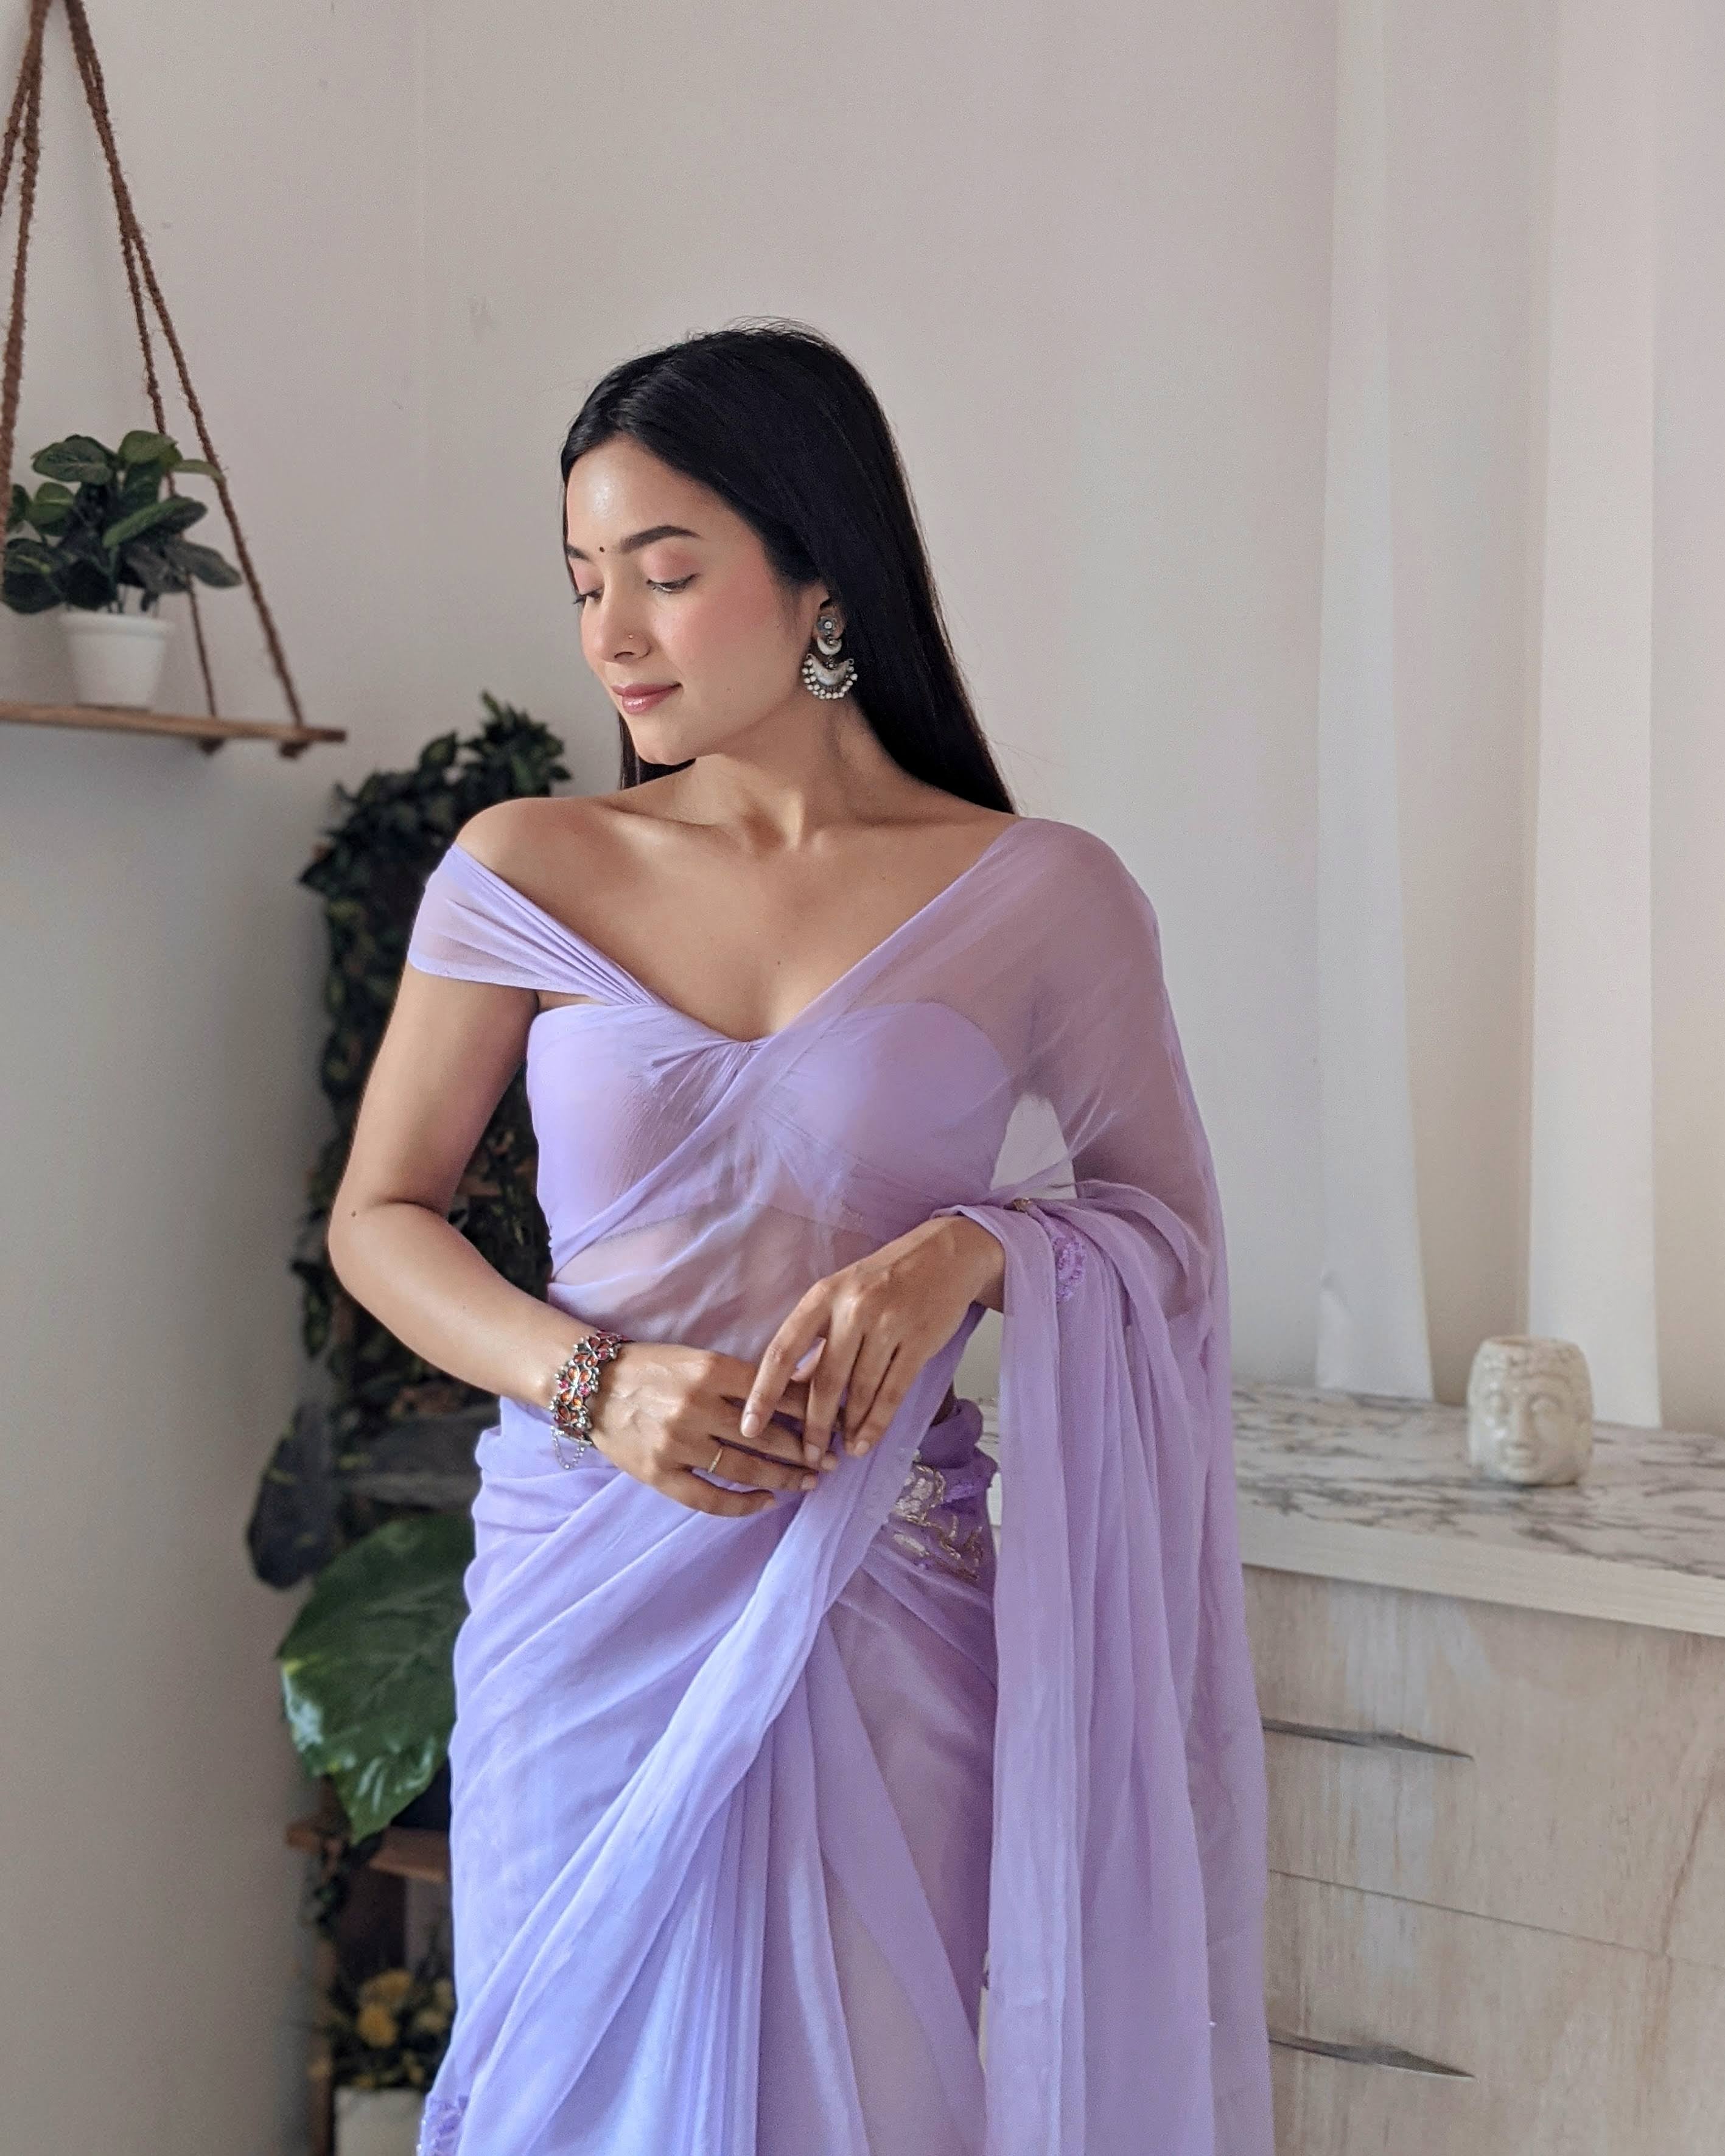 Sequins work Chiffon Saree in Lavender Color - Saree Set ( Picco+Fall+Pre-stitched+Stitched Blouse)